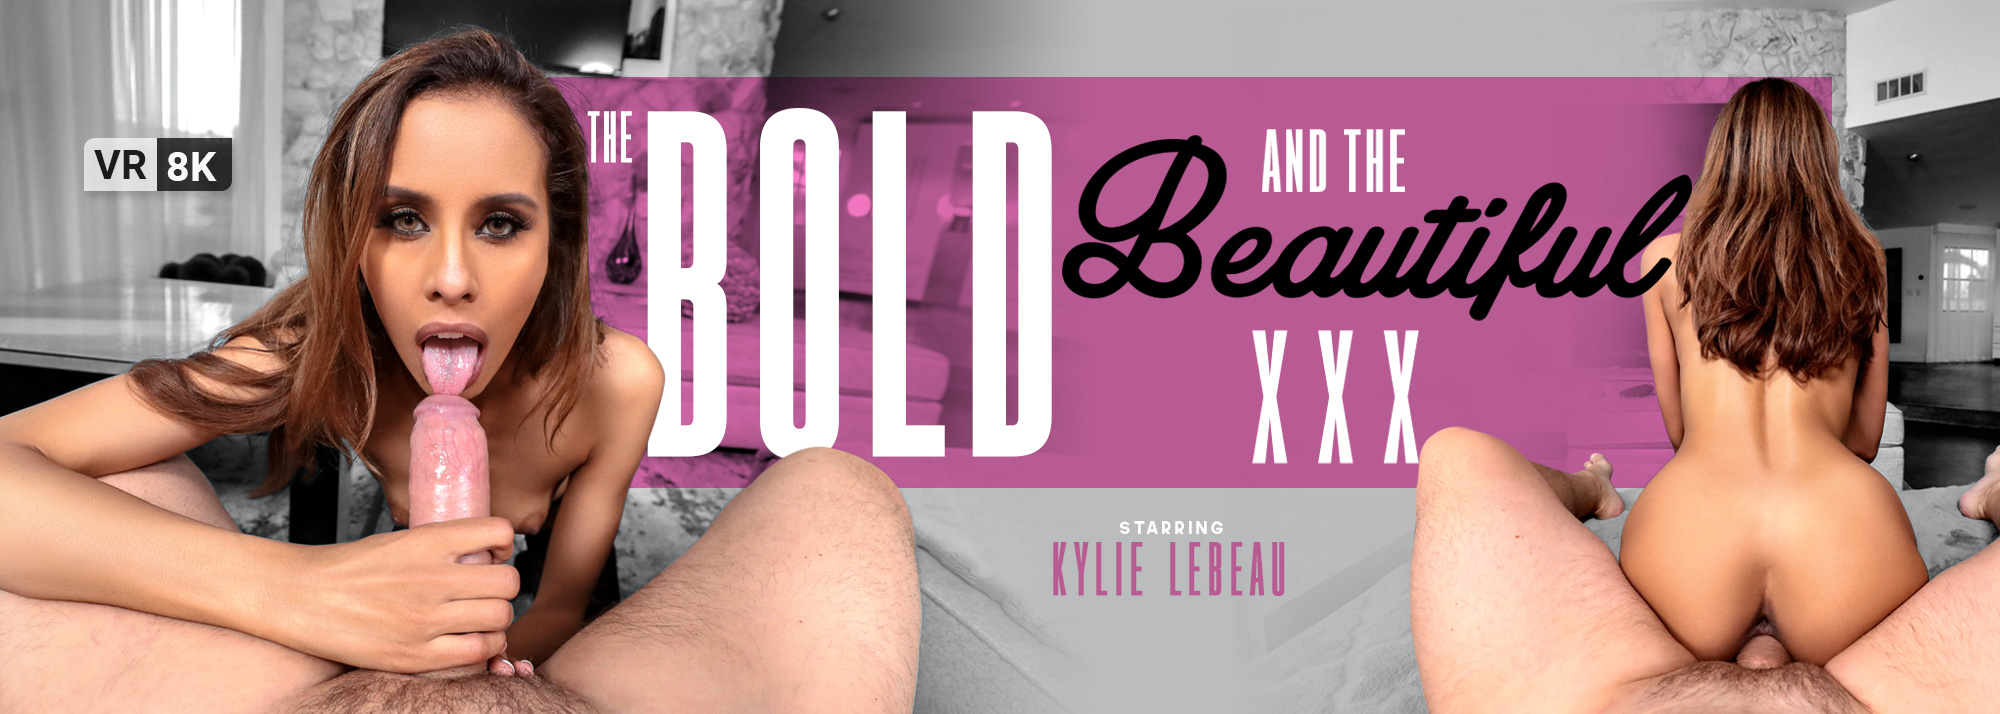 Bold Xxx Video - The Bold and The Beautiful XXX VR Porn Video: 8K, 4K, Full HD and 180/360  POV | VR Bangers